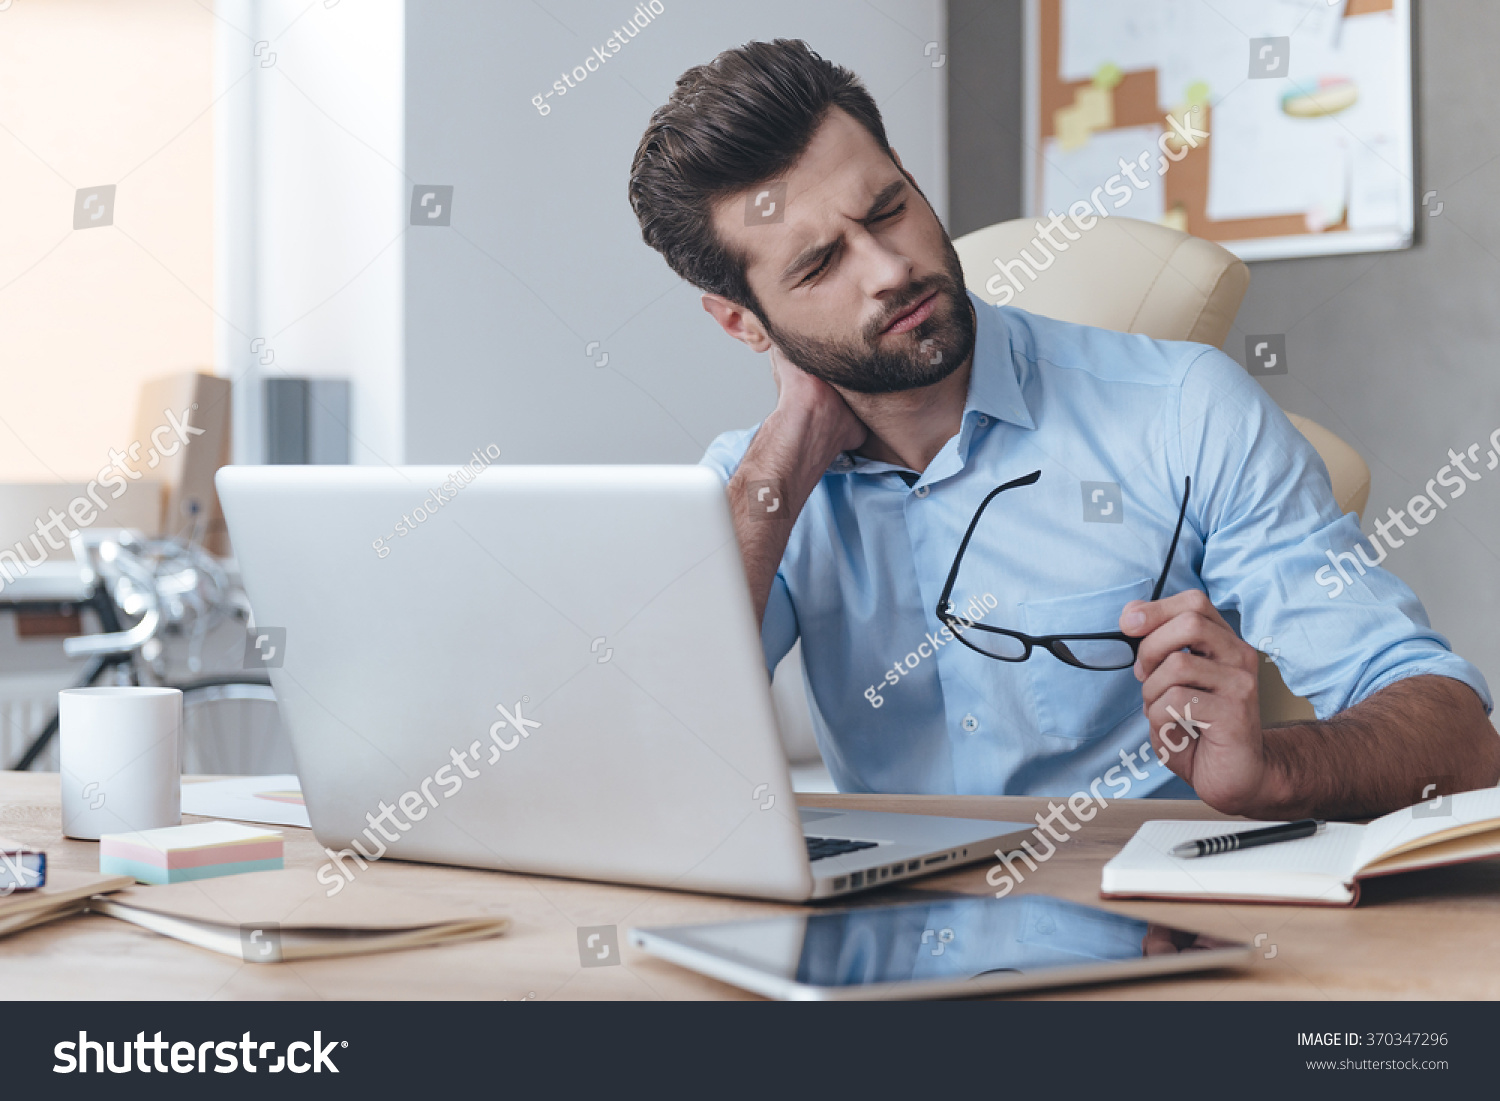 Feeling exhausted. Frustrated young handsome man looking exhausted while sitting at his working place and carrying his glasses in hand #370347296